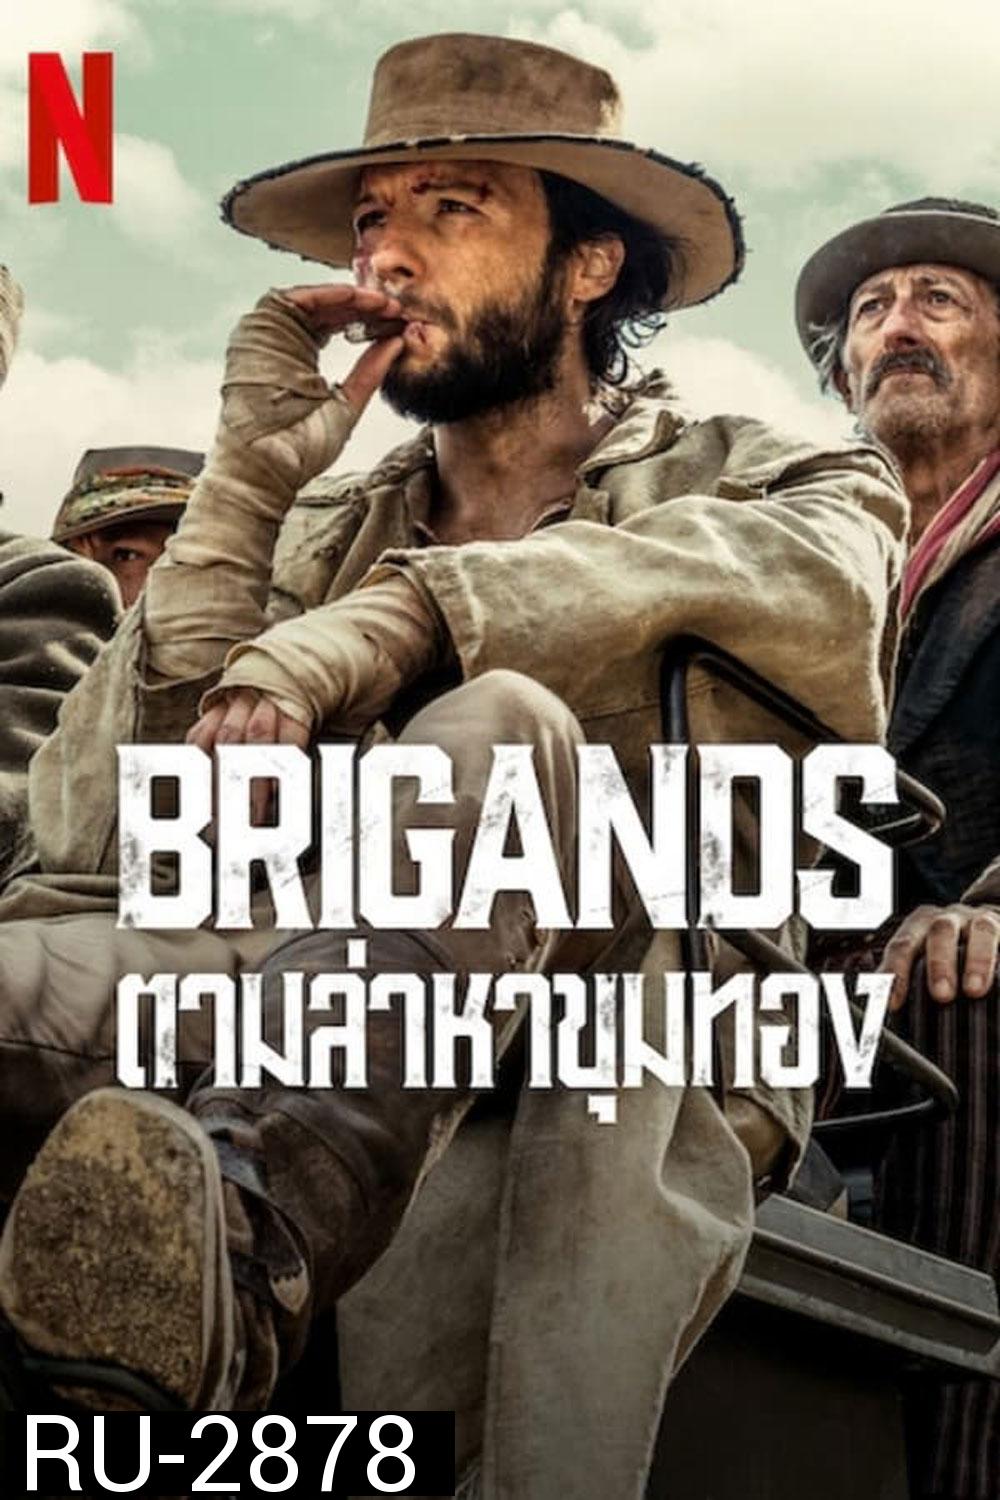 Brigands The Quest for Gold ตามล่าหาขุมทอง